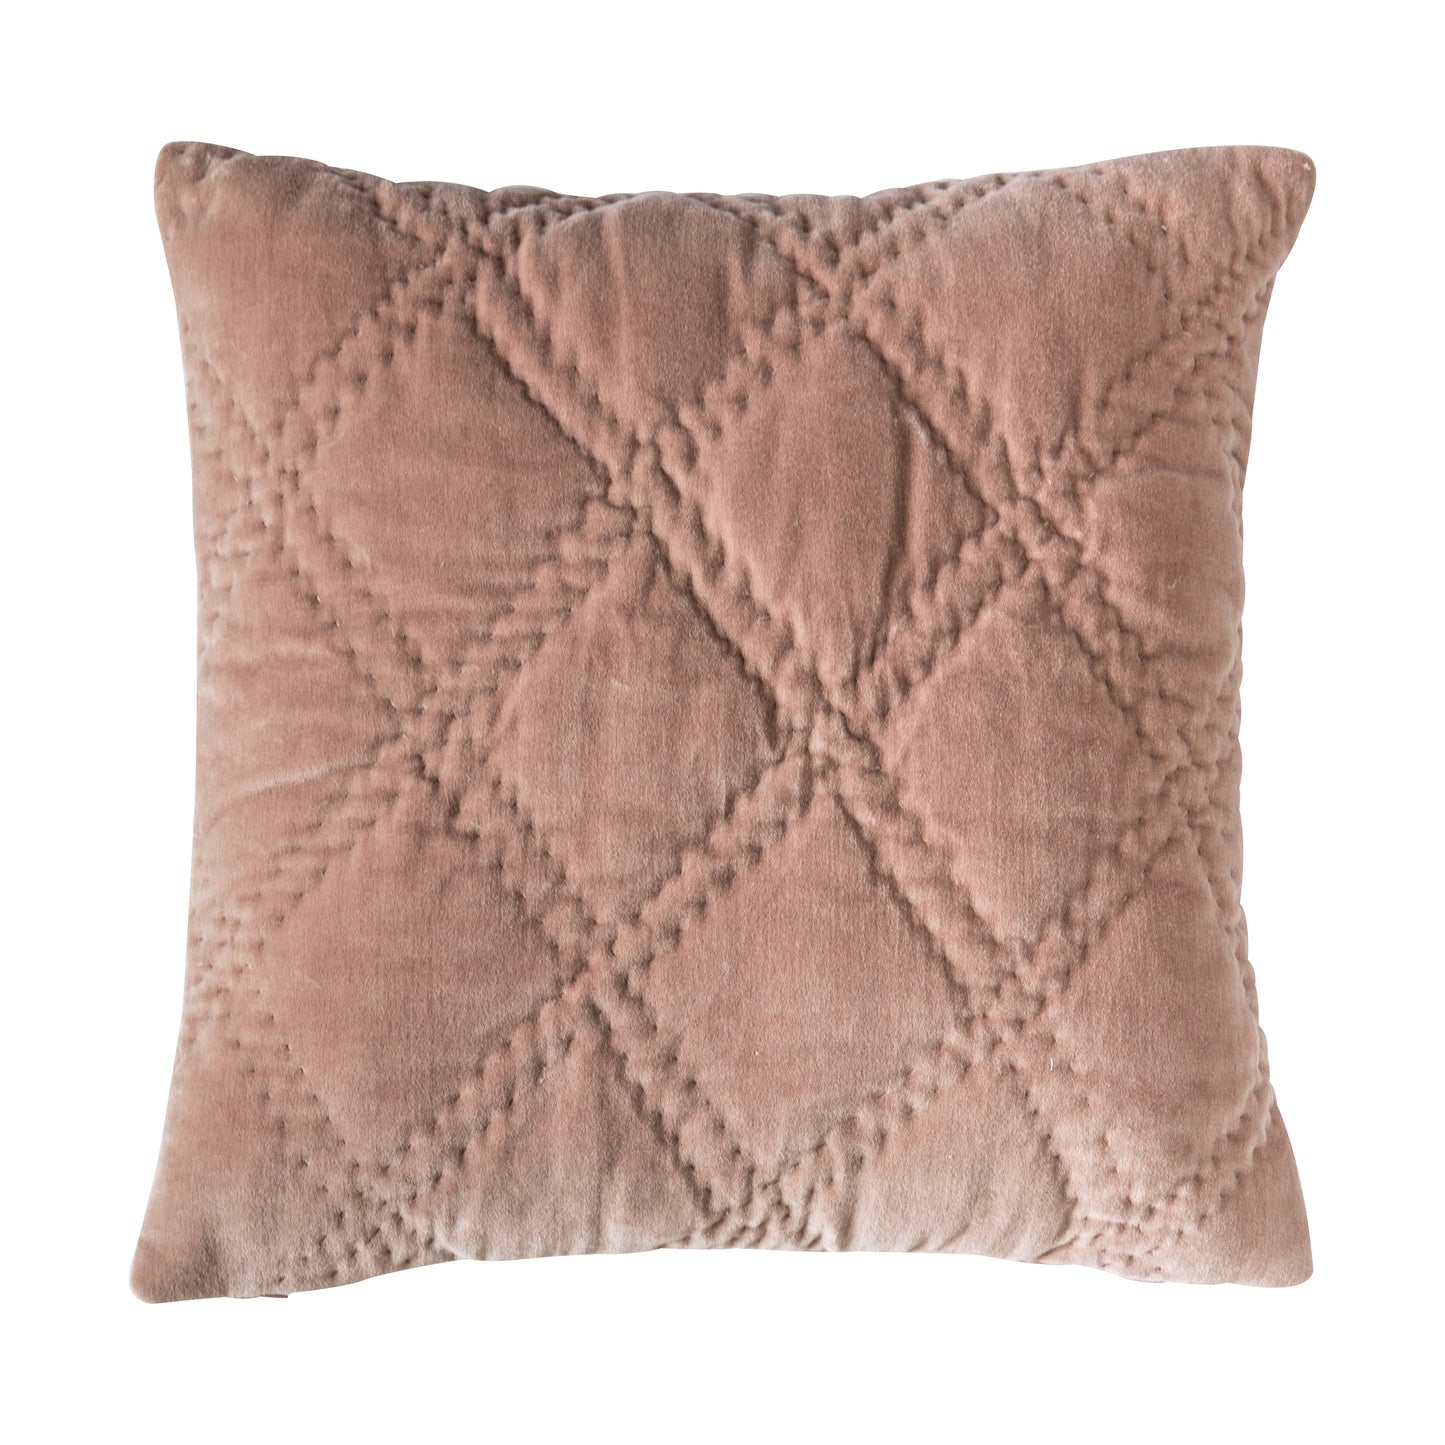 A Quilted Cotton Velvet Cushion Blush 450x450mm for interior decor from Kikiathome.co.uk.